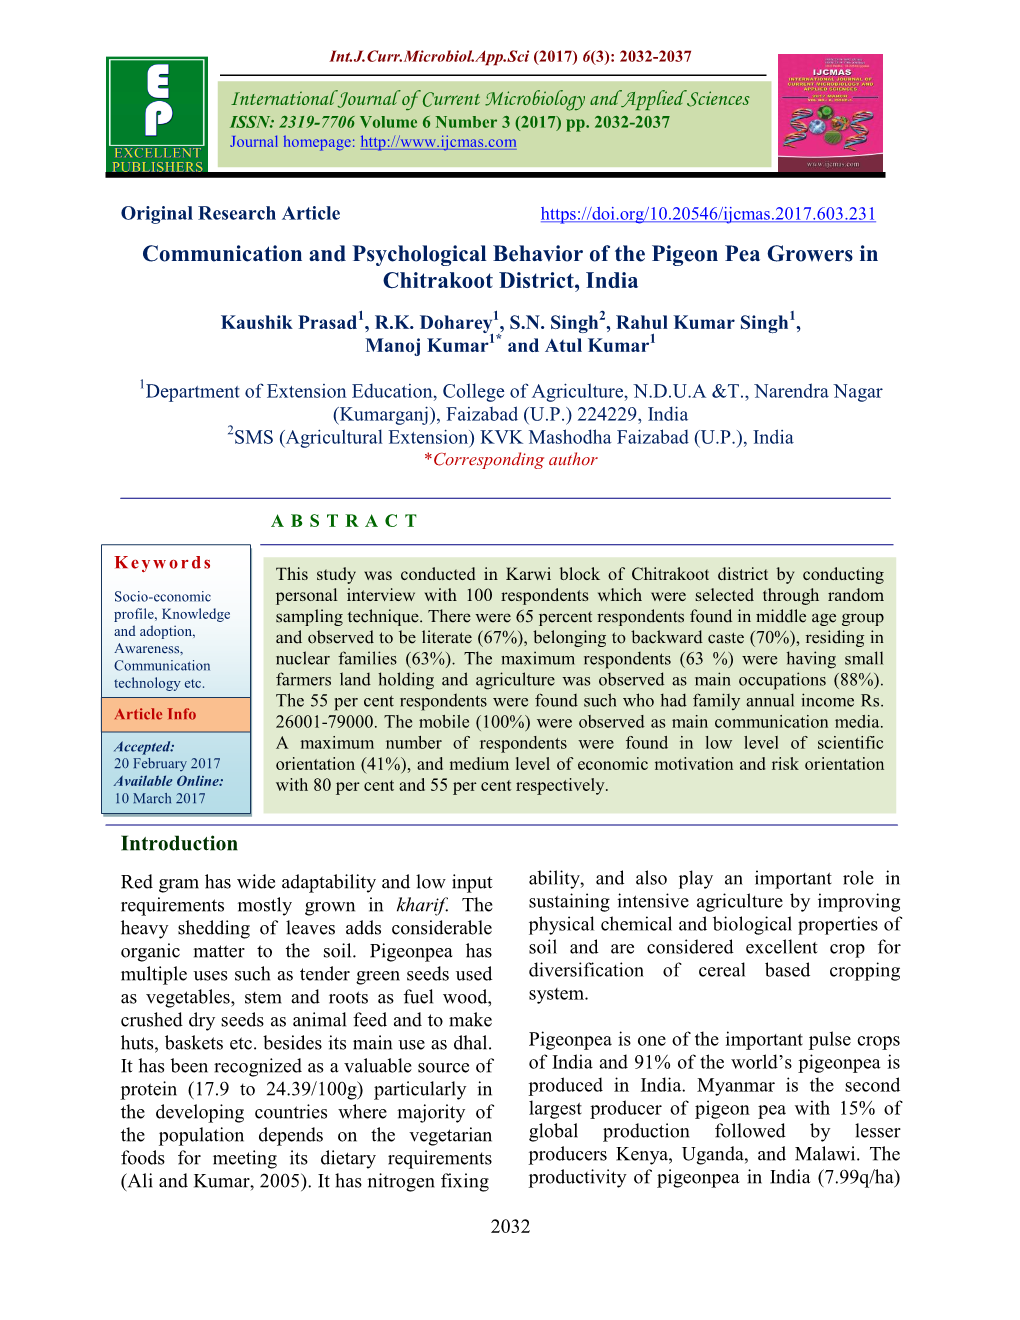 Communication and Psychological Behavior of the Pigeon Pea Growers in Chitrakoot District, India